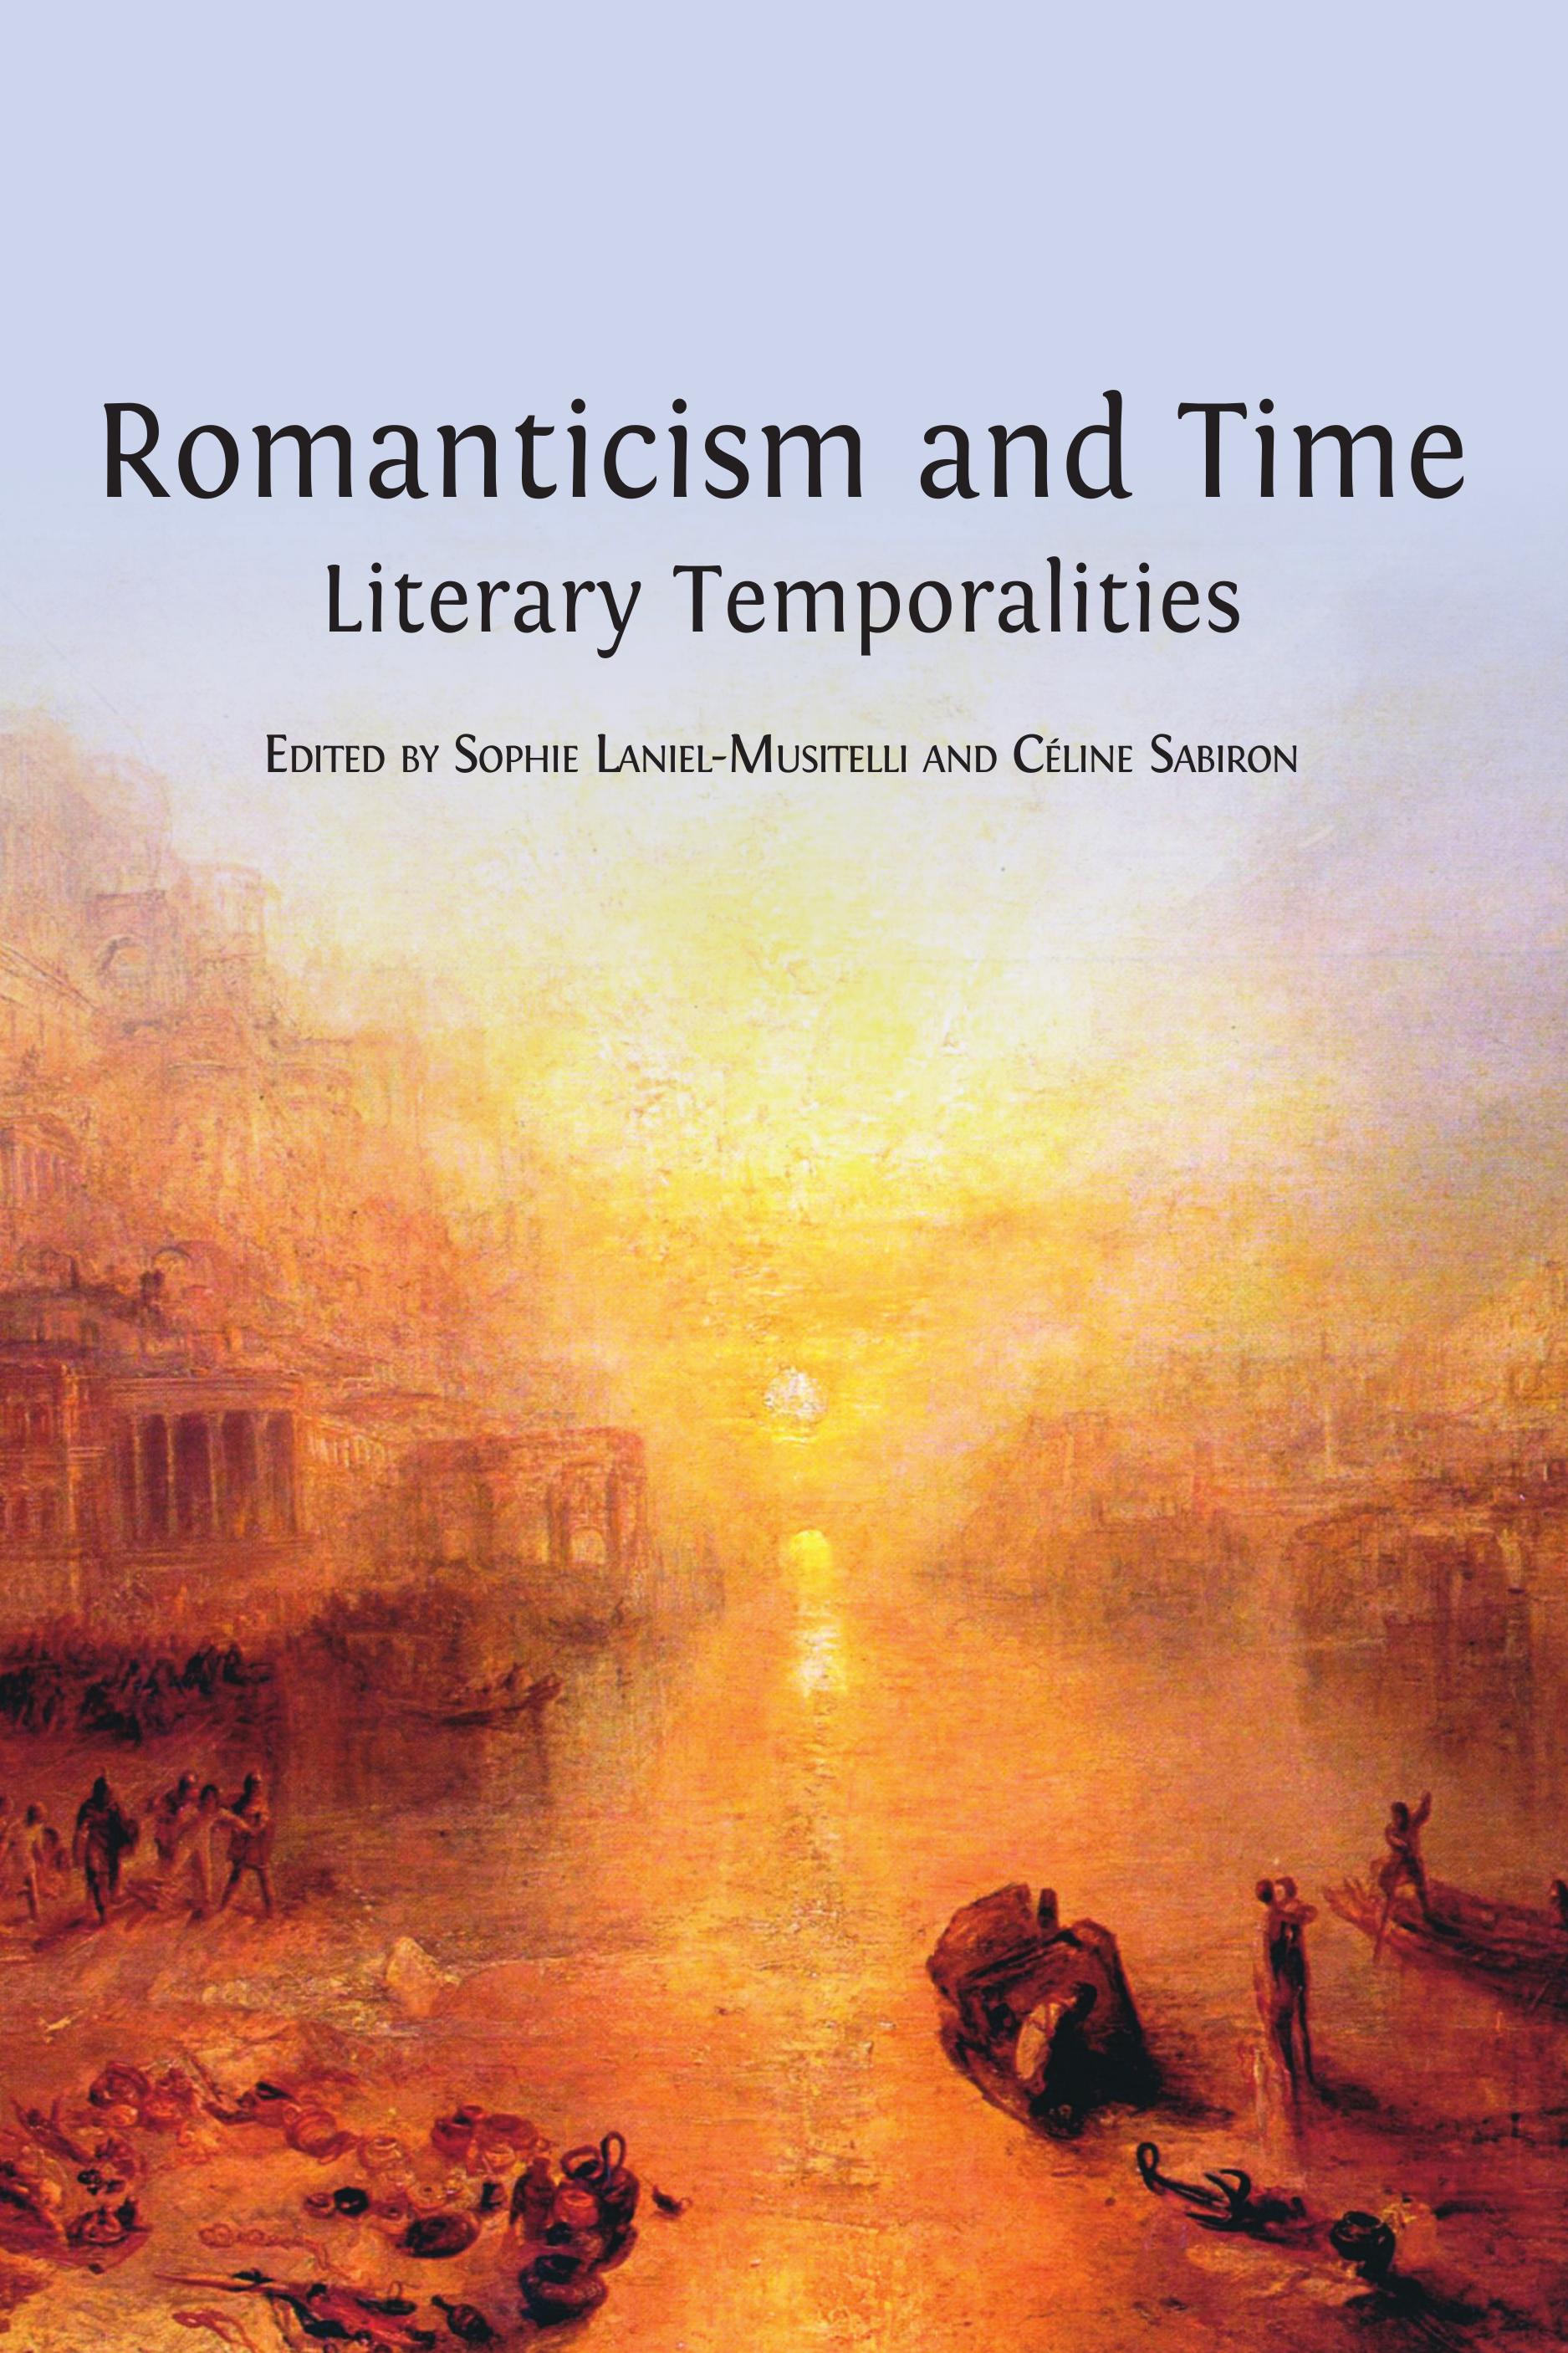 Romanticism and Time:  Literary Temporalities